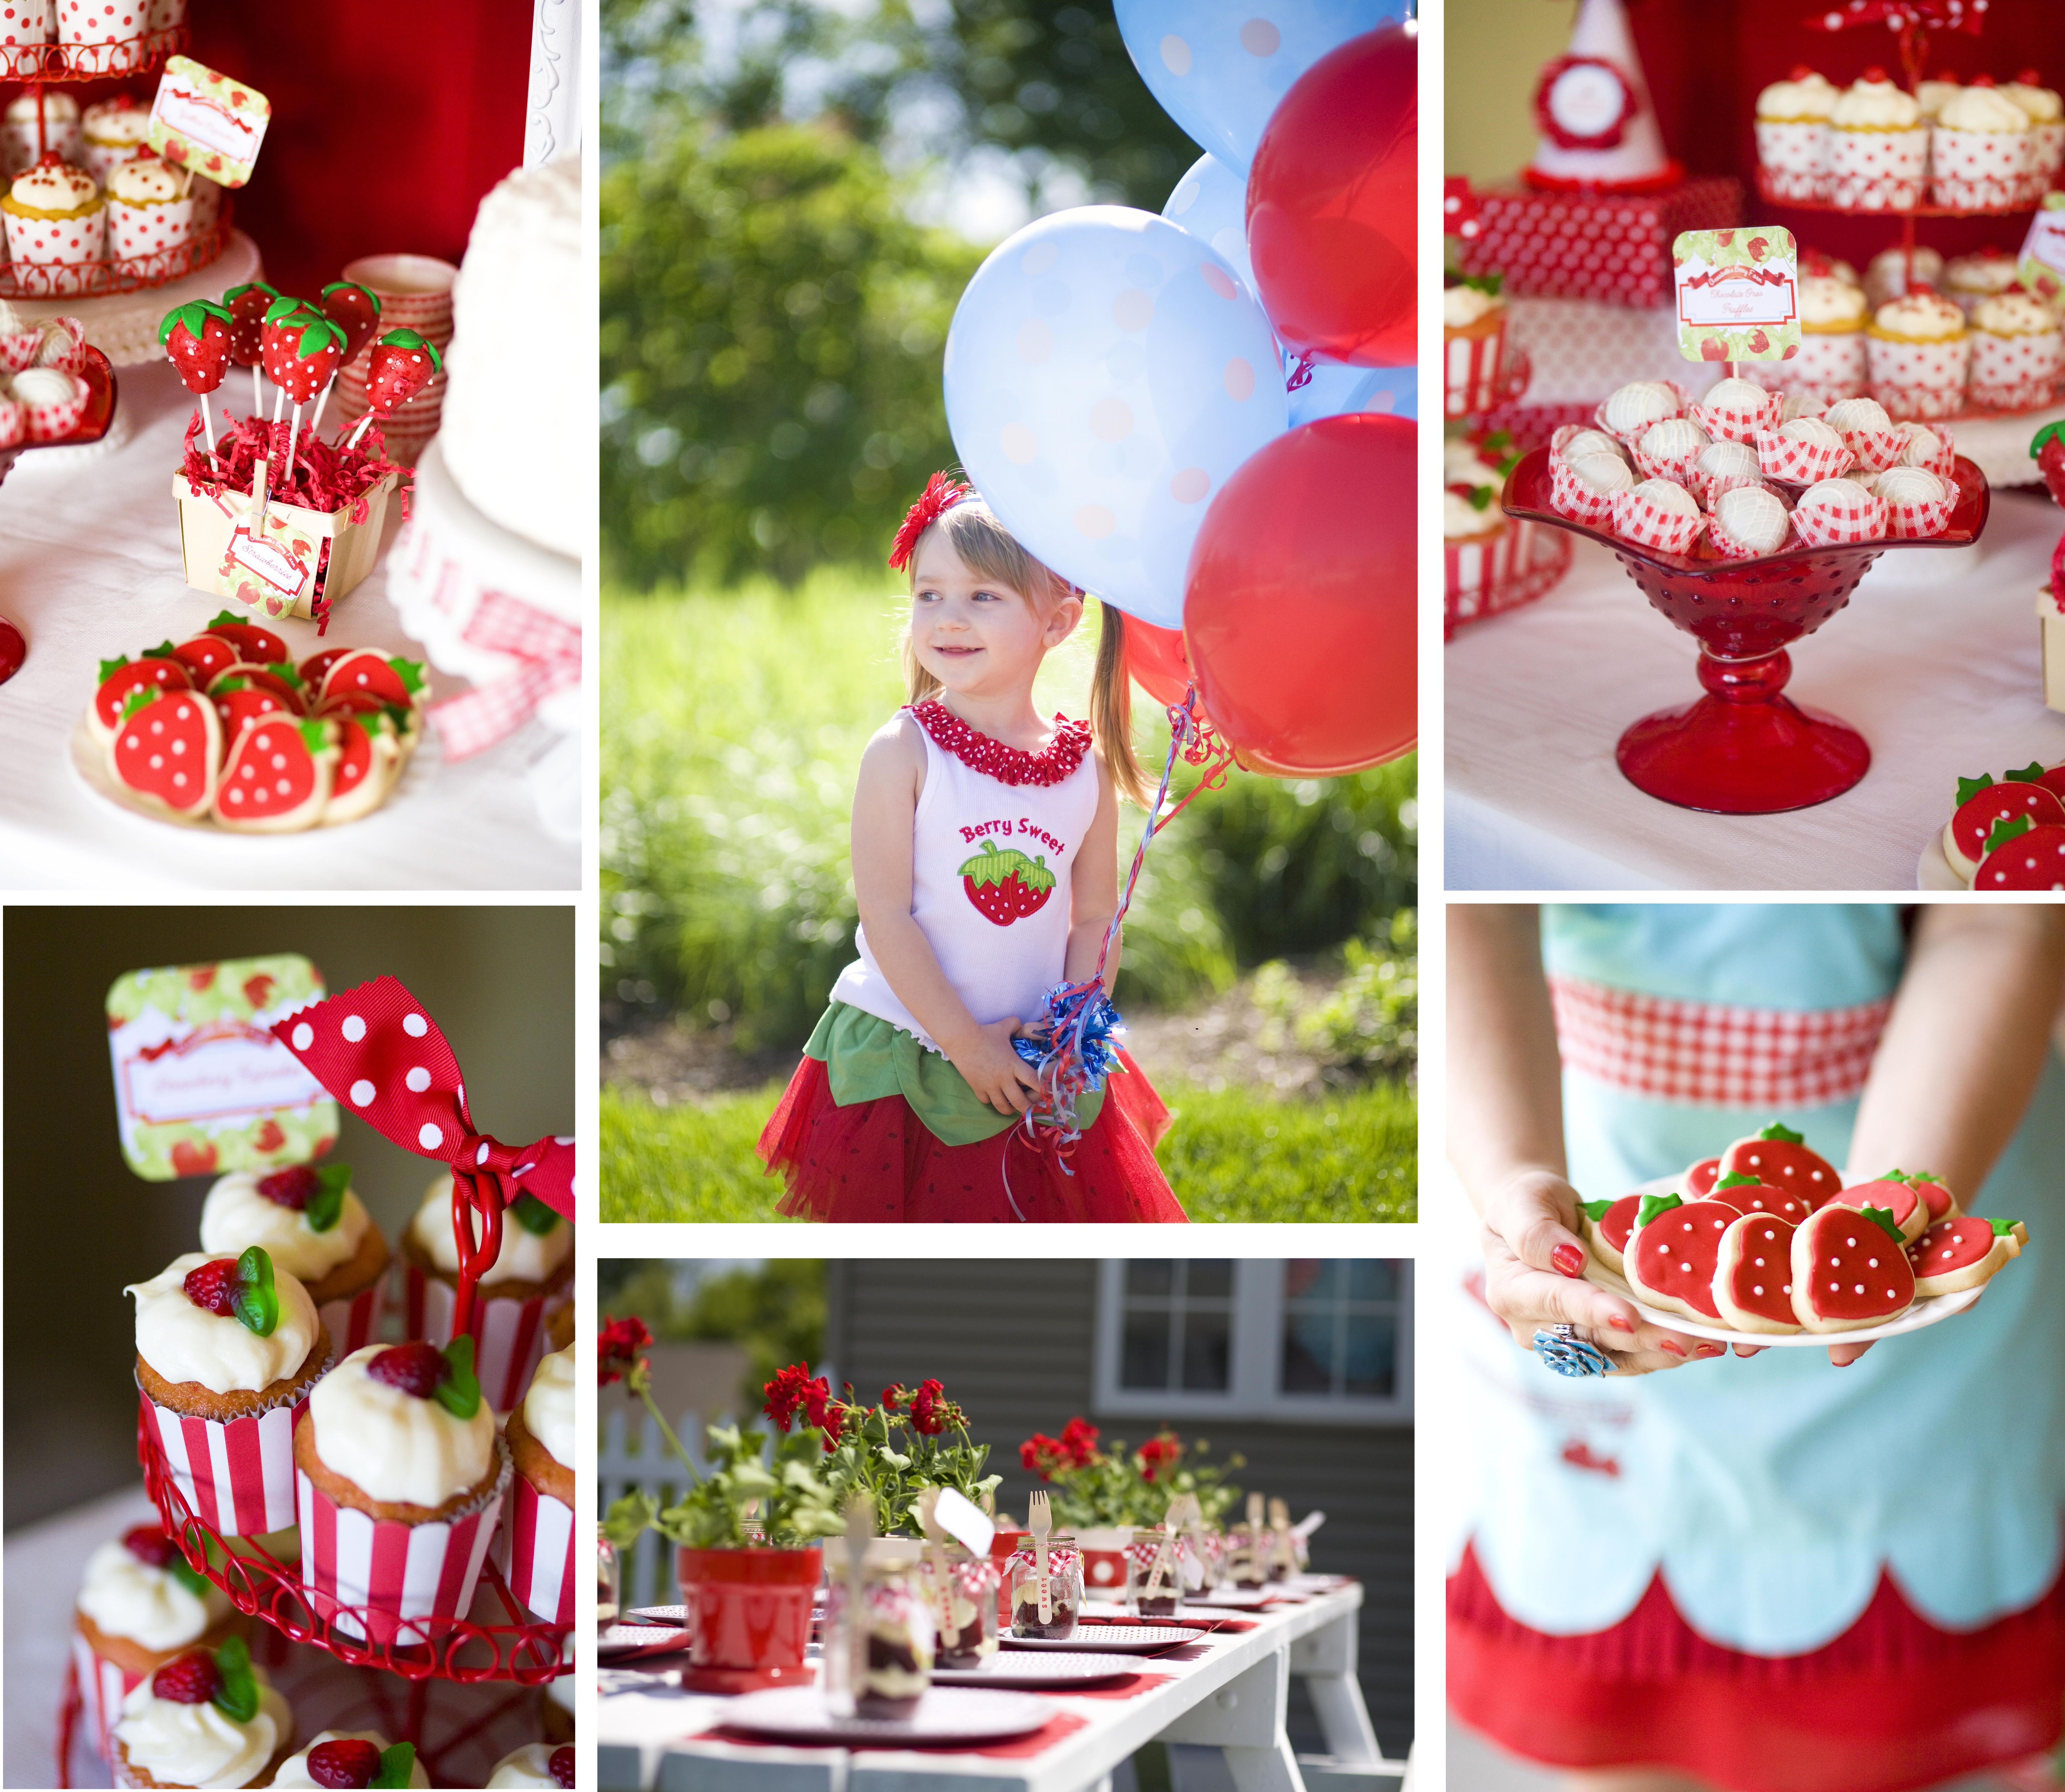 Strawberry Baby Shower Decorations for Girls a Little Strawberry